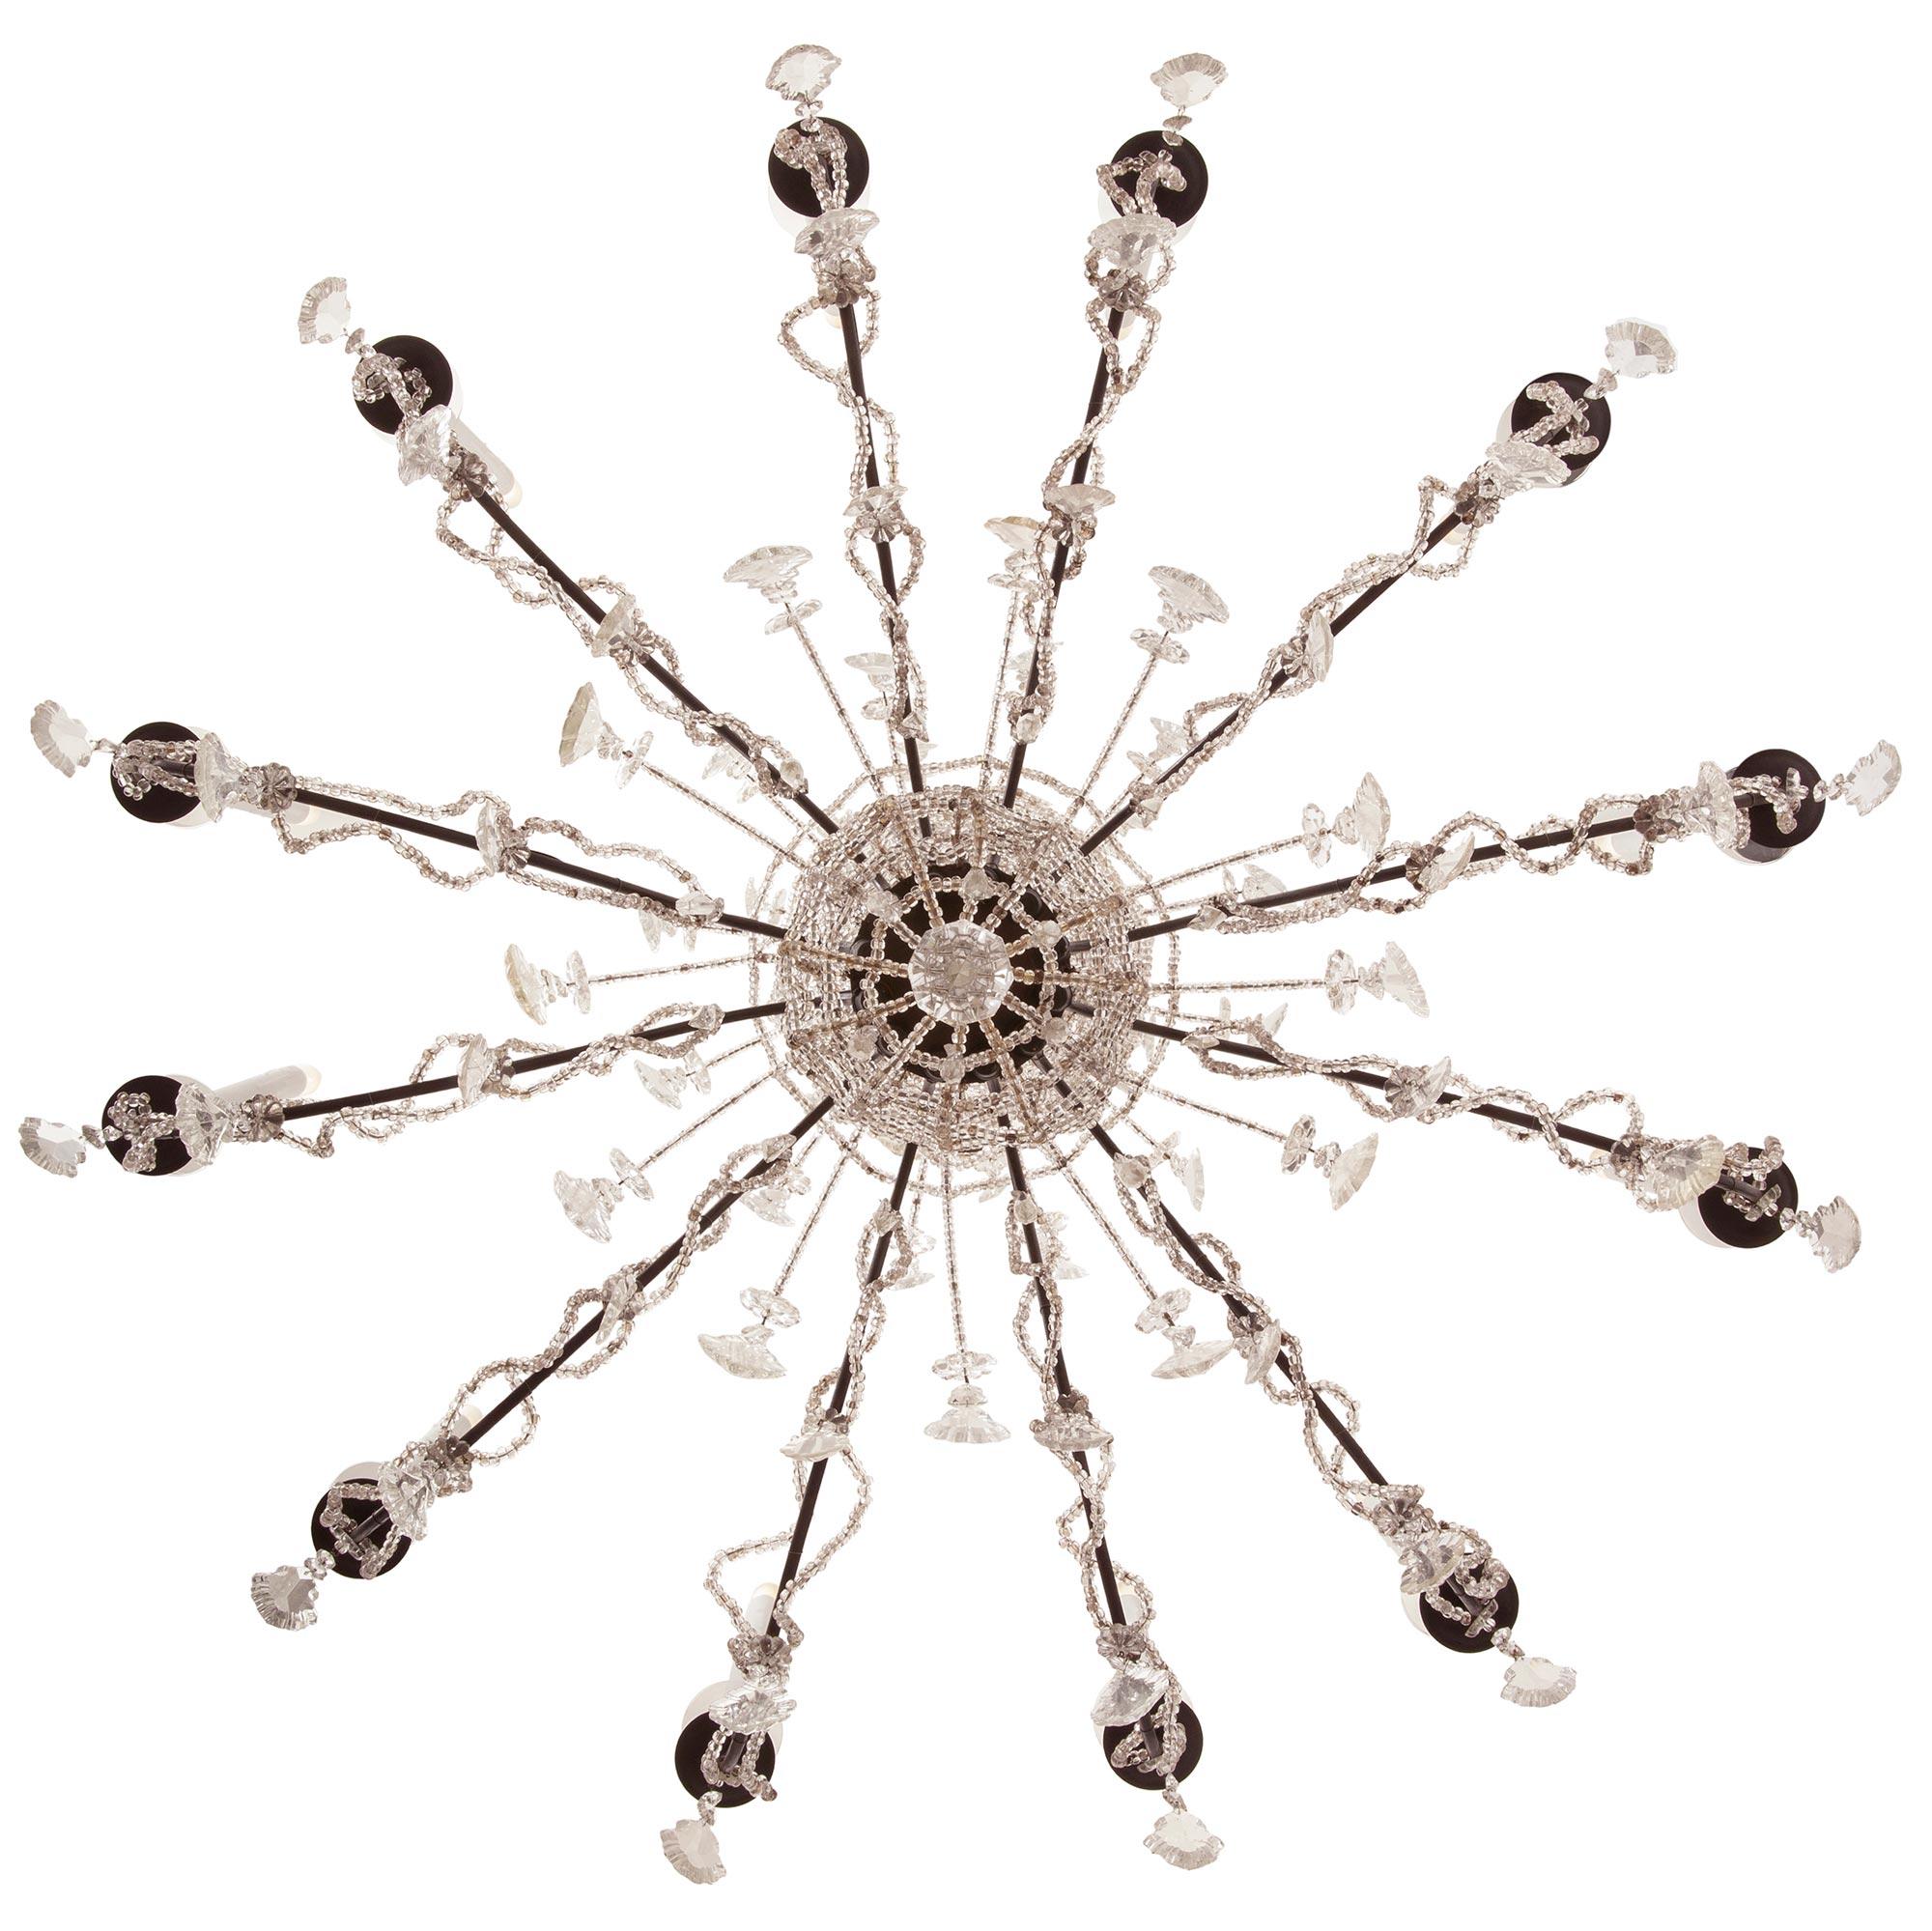 A stunning and extremely decorative pair of Italian turn of the century iron and crystal Venetian st. chandeliers. Each twelve arm chandelier is centered by a beautiful diamond shaped cut crystal pendant below a lovely array of cut crystal pendants